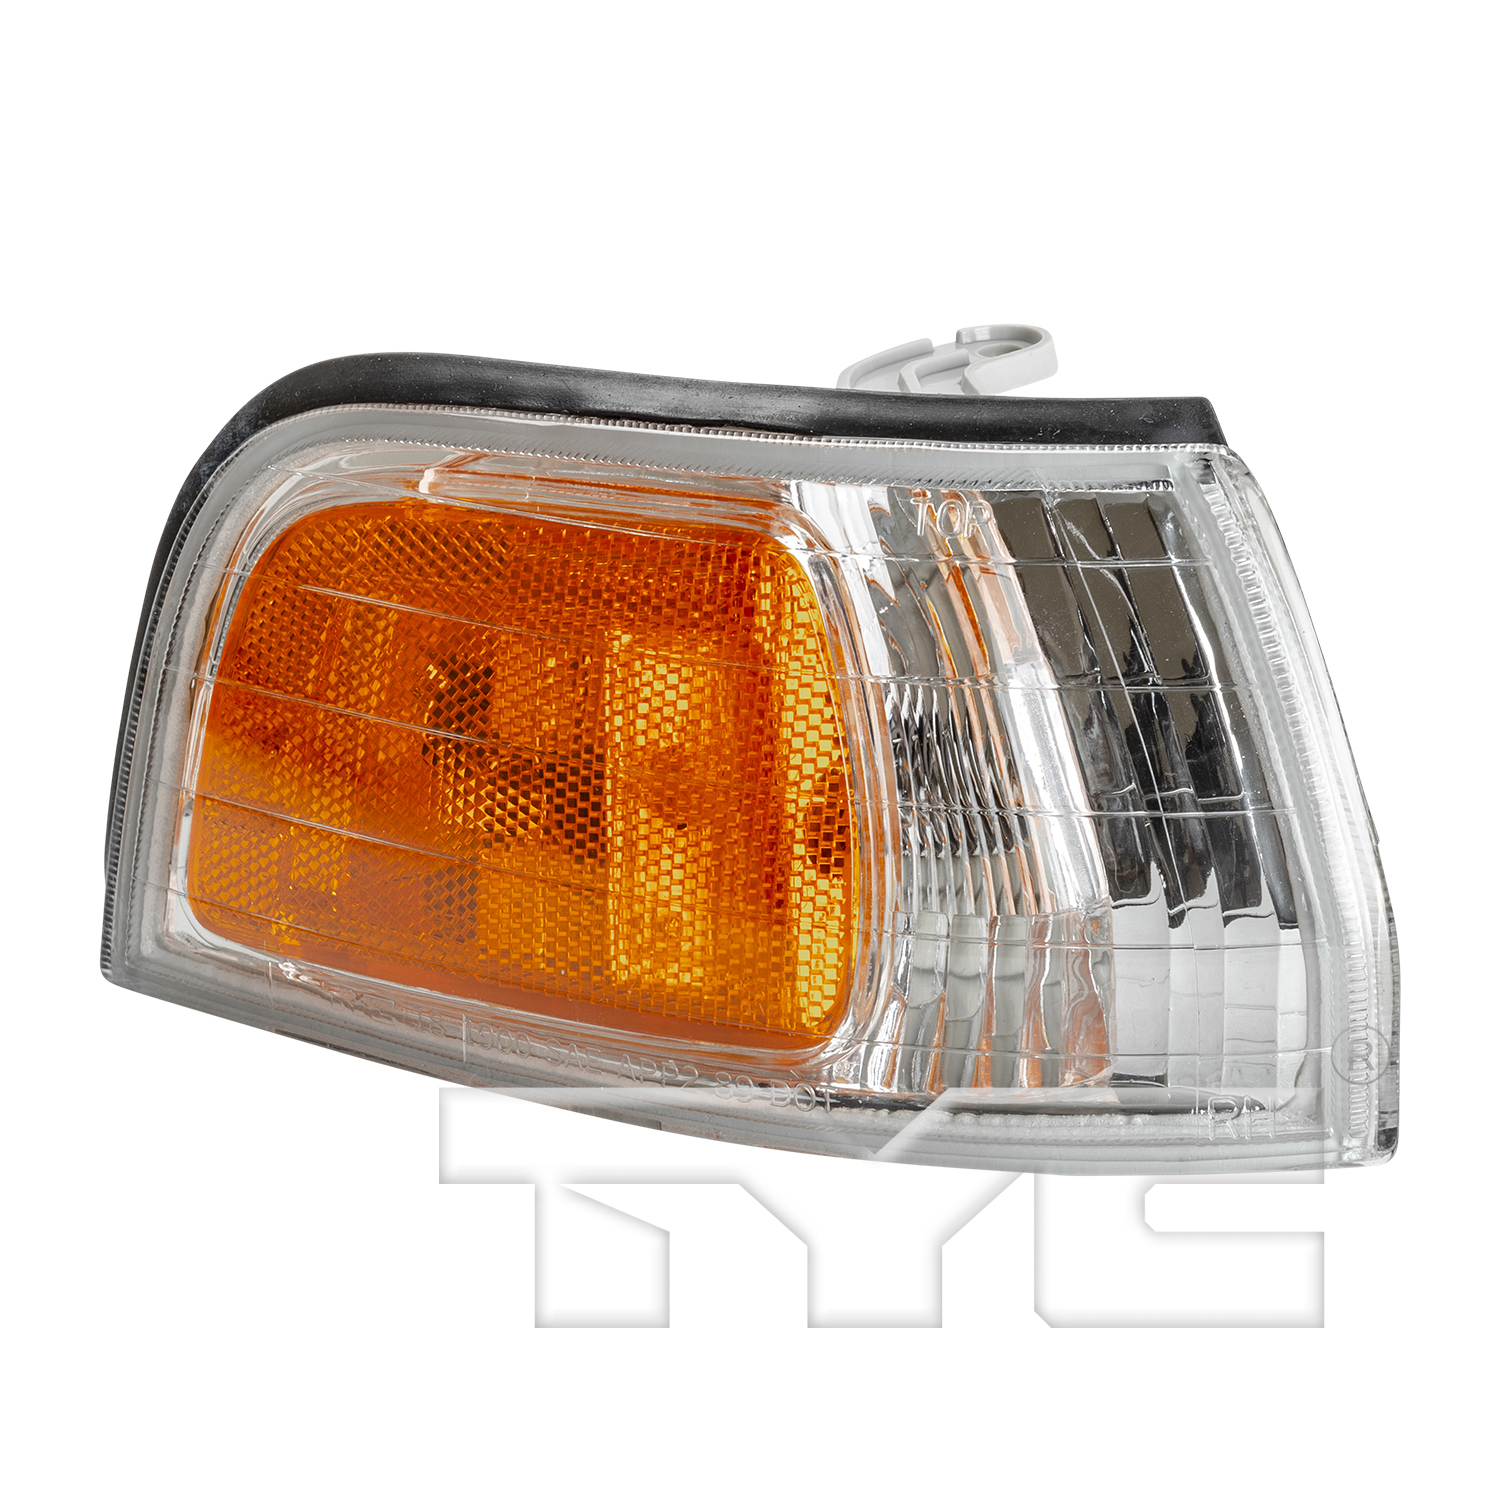 Aftermarket LAMPS for HONDA - ACCORD, ACCORD,92-93,RT Front marker lamp assy